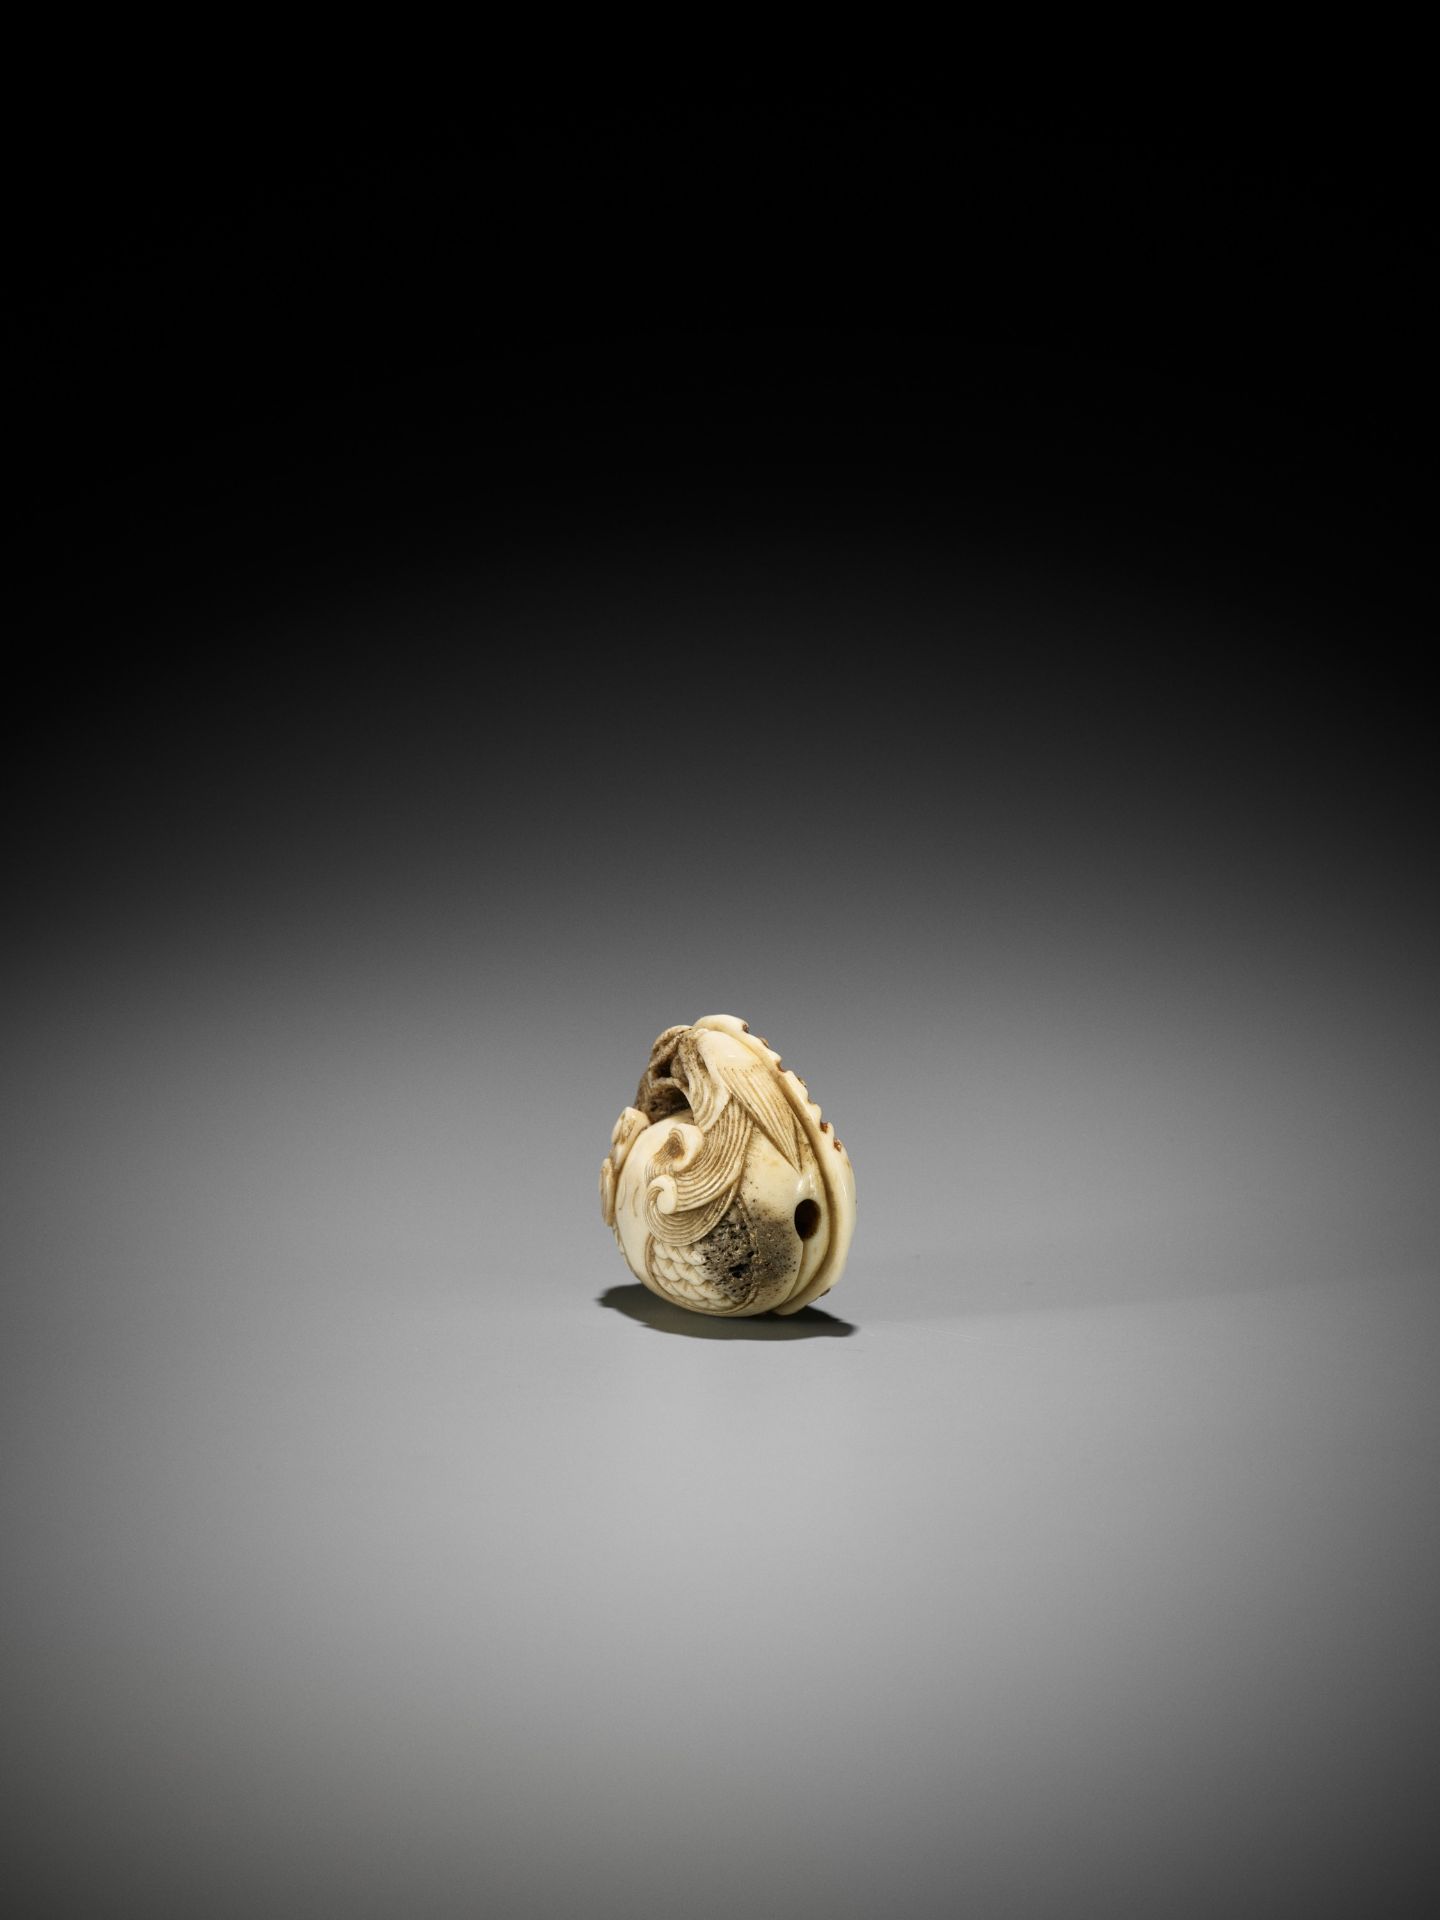 A FINE STAG ANTLER NETSUKE OF A DOUBLE DRAGON-HEADED MOKUGYO - Image 5 of 11